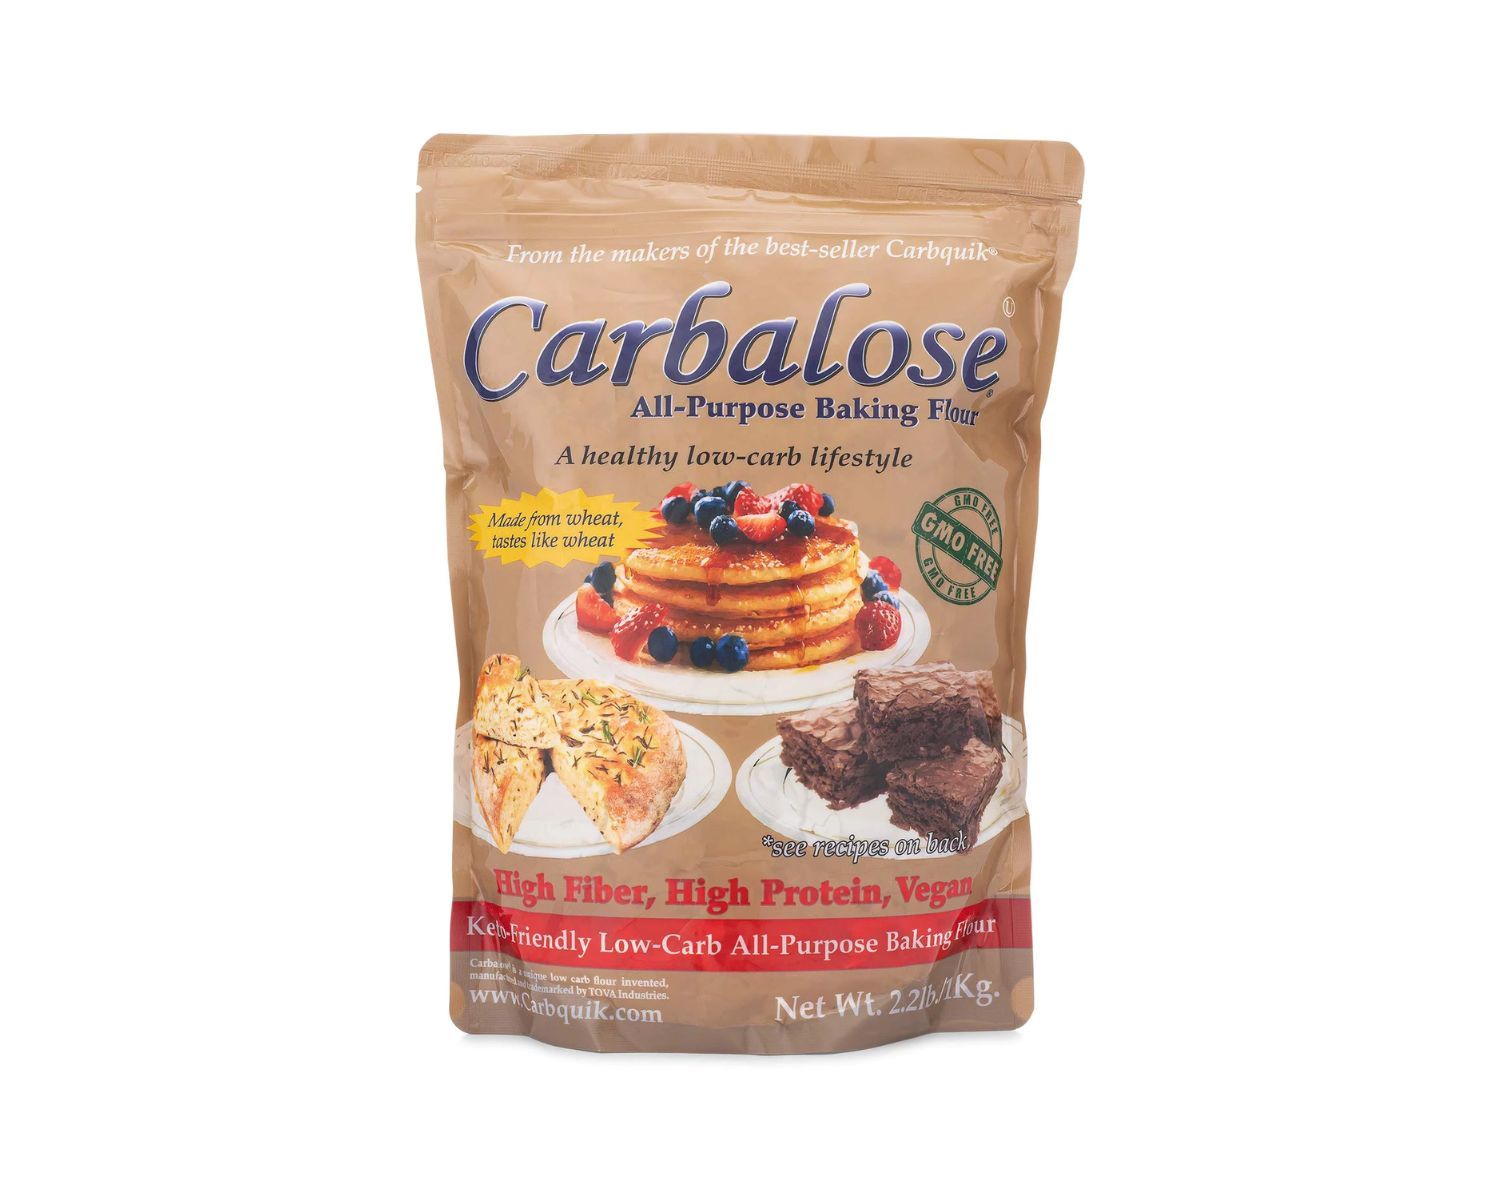 20 Carbalose Flour Nutrition Facts - Facts.net